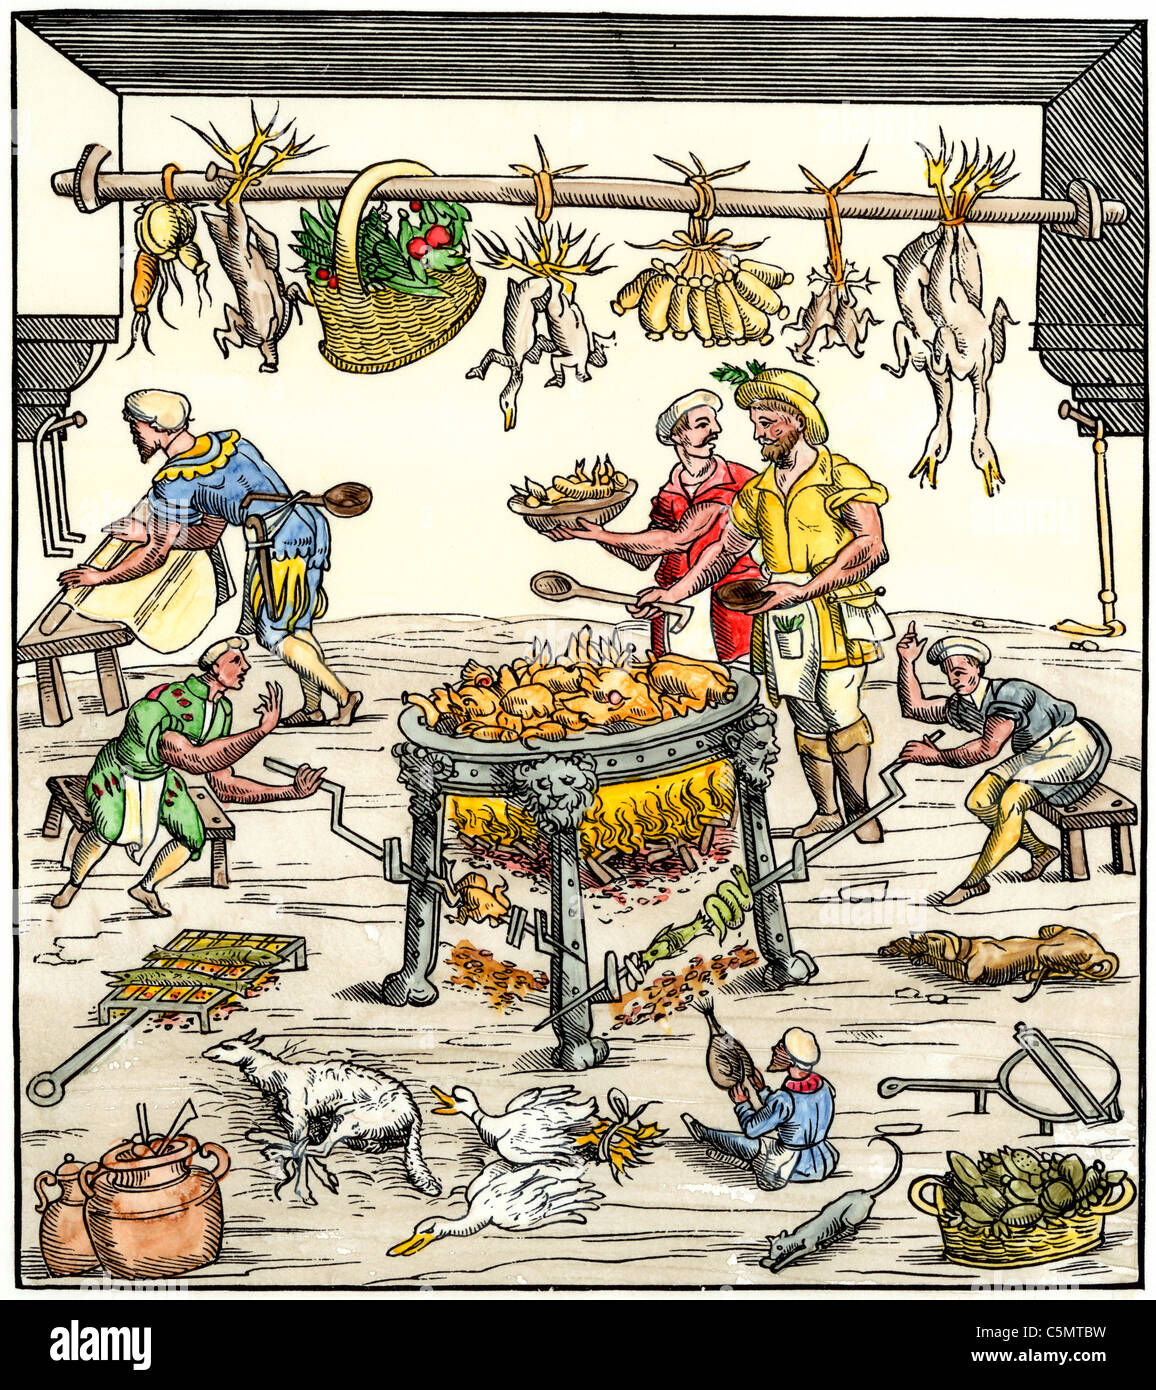 18th Century French Food Vendor--Hot Puddings Hand-Colored Woodcut Hot!